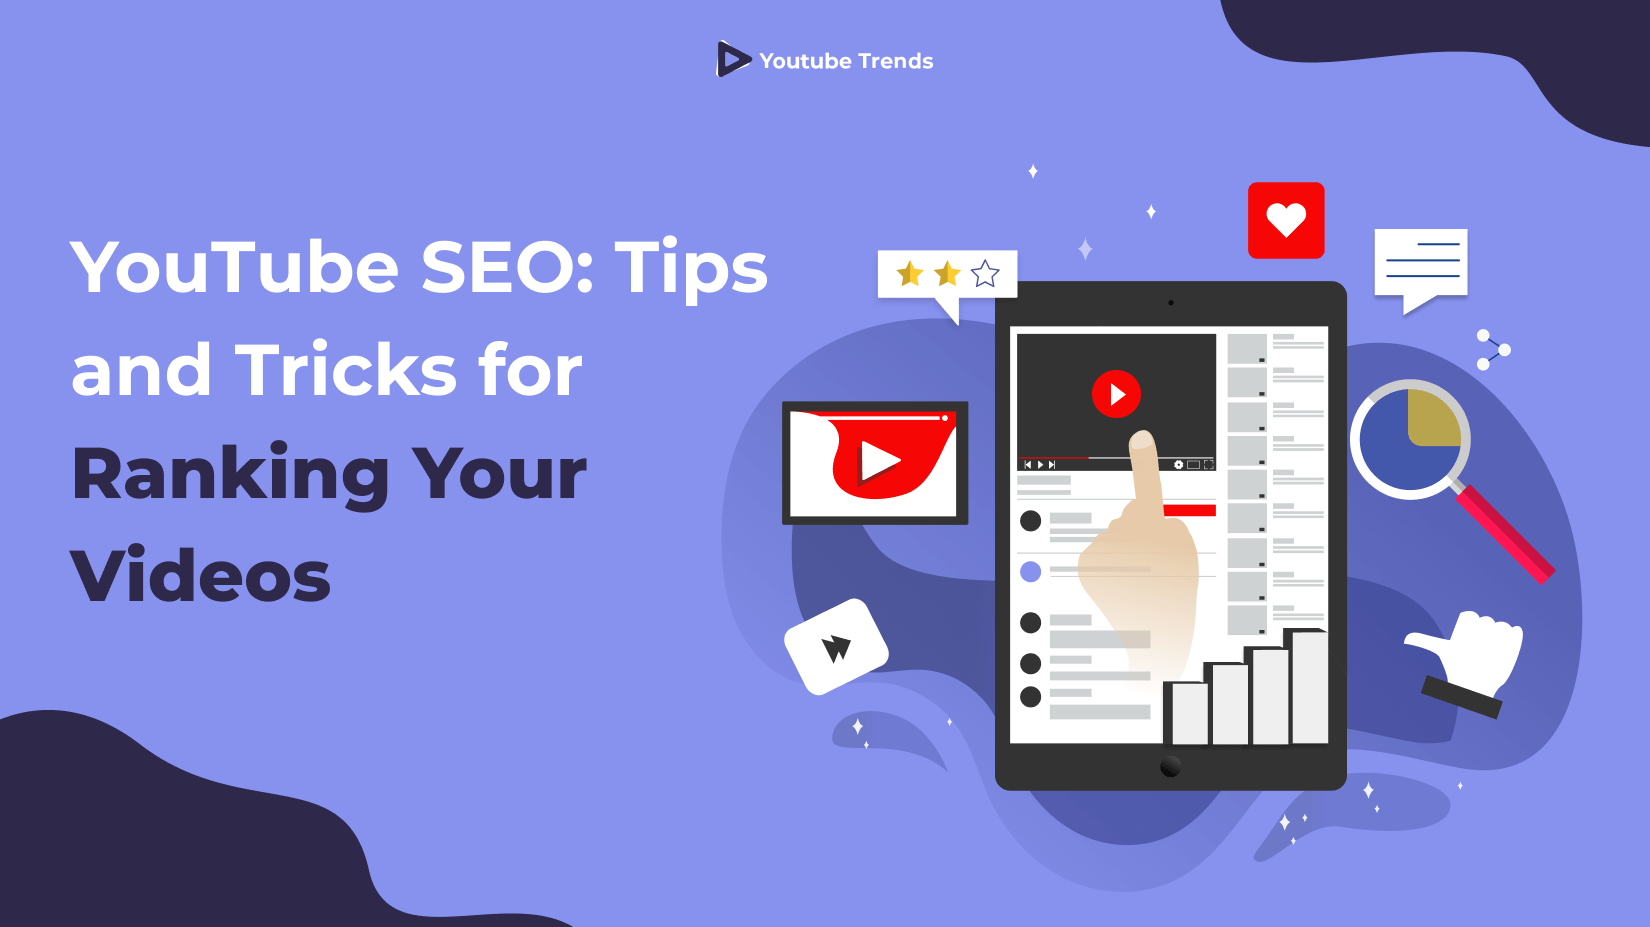 YouTube SEO: Tips and Tricks for Ranking Your Videos Higher in Search Results